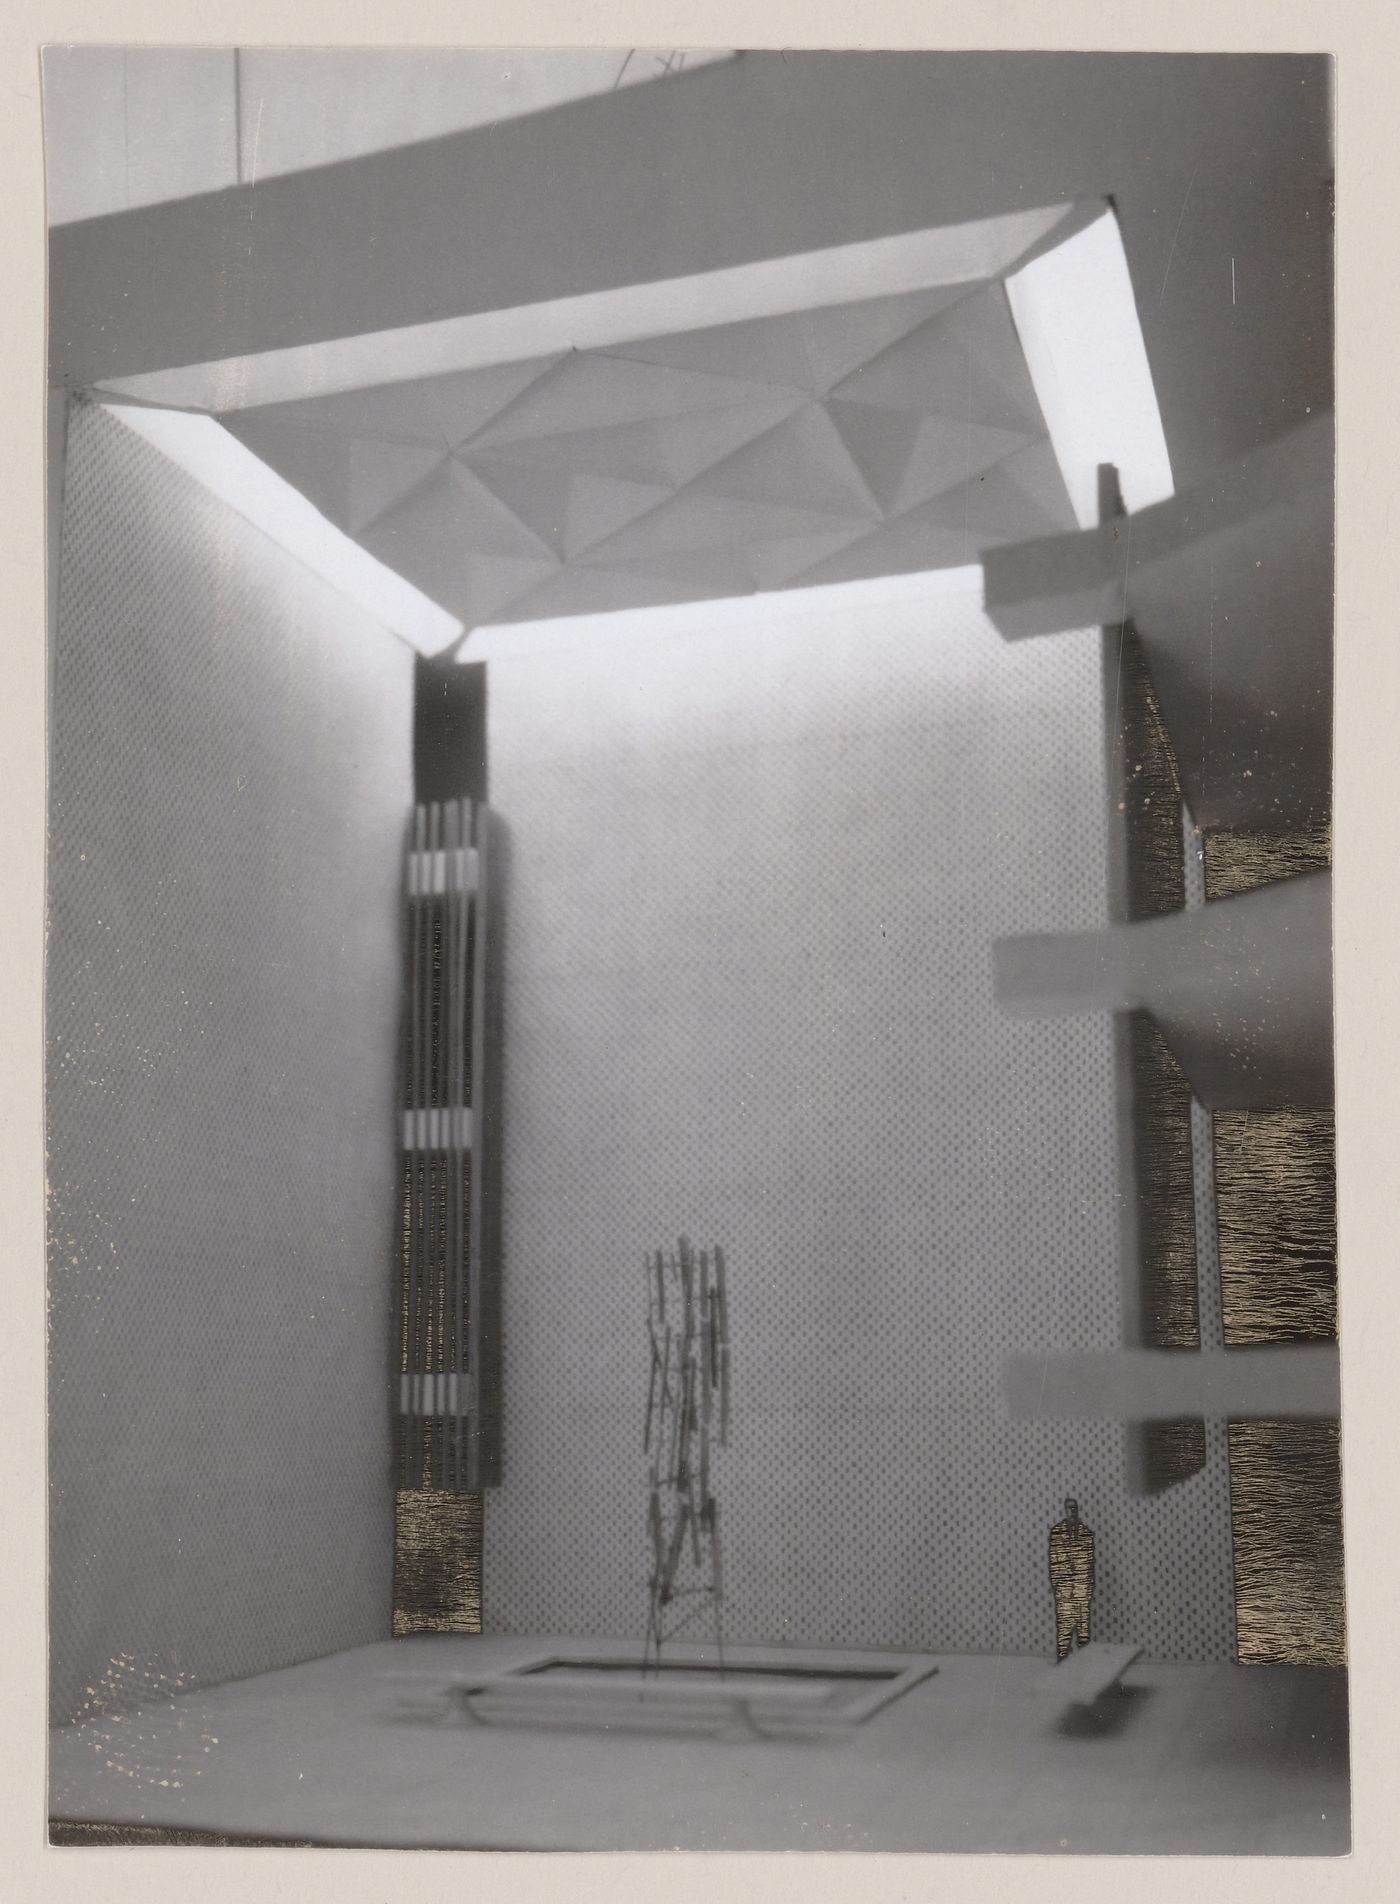 View of model for interior of United States Embassy, Oslo, Norway
